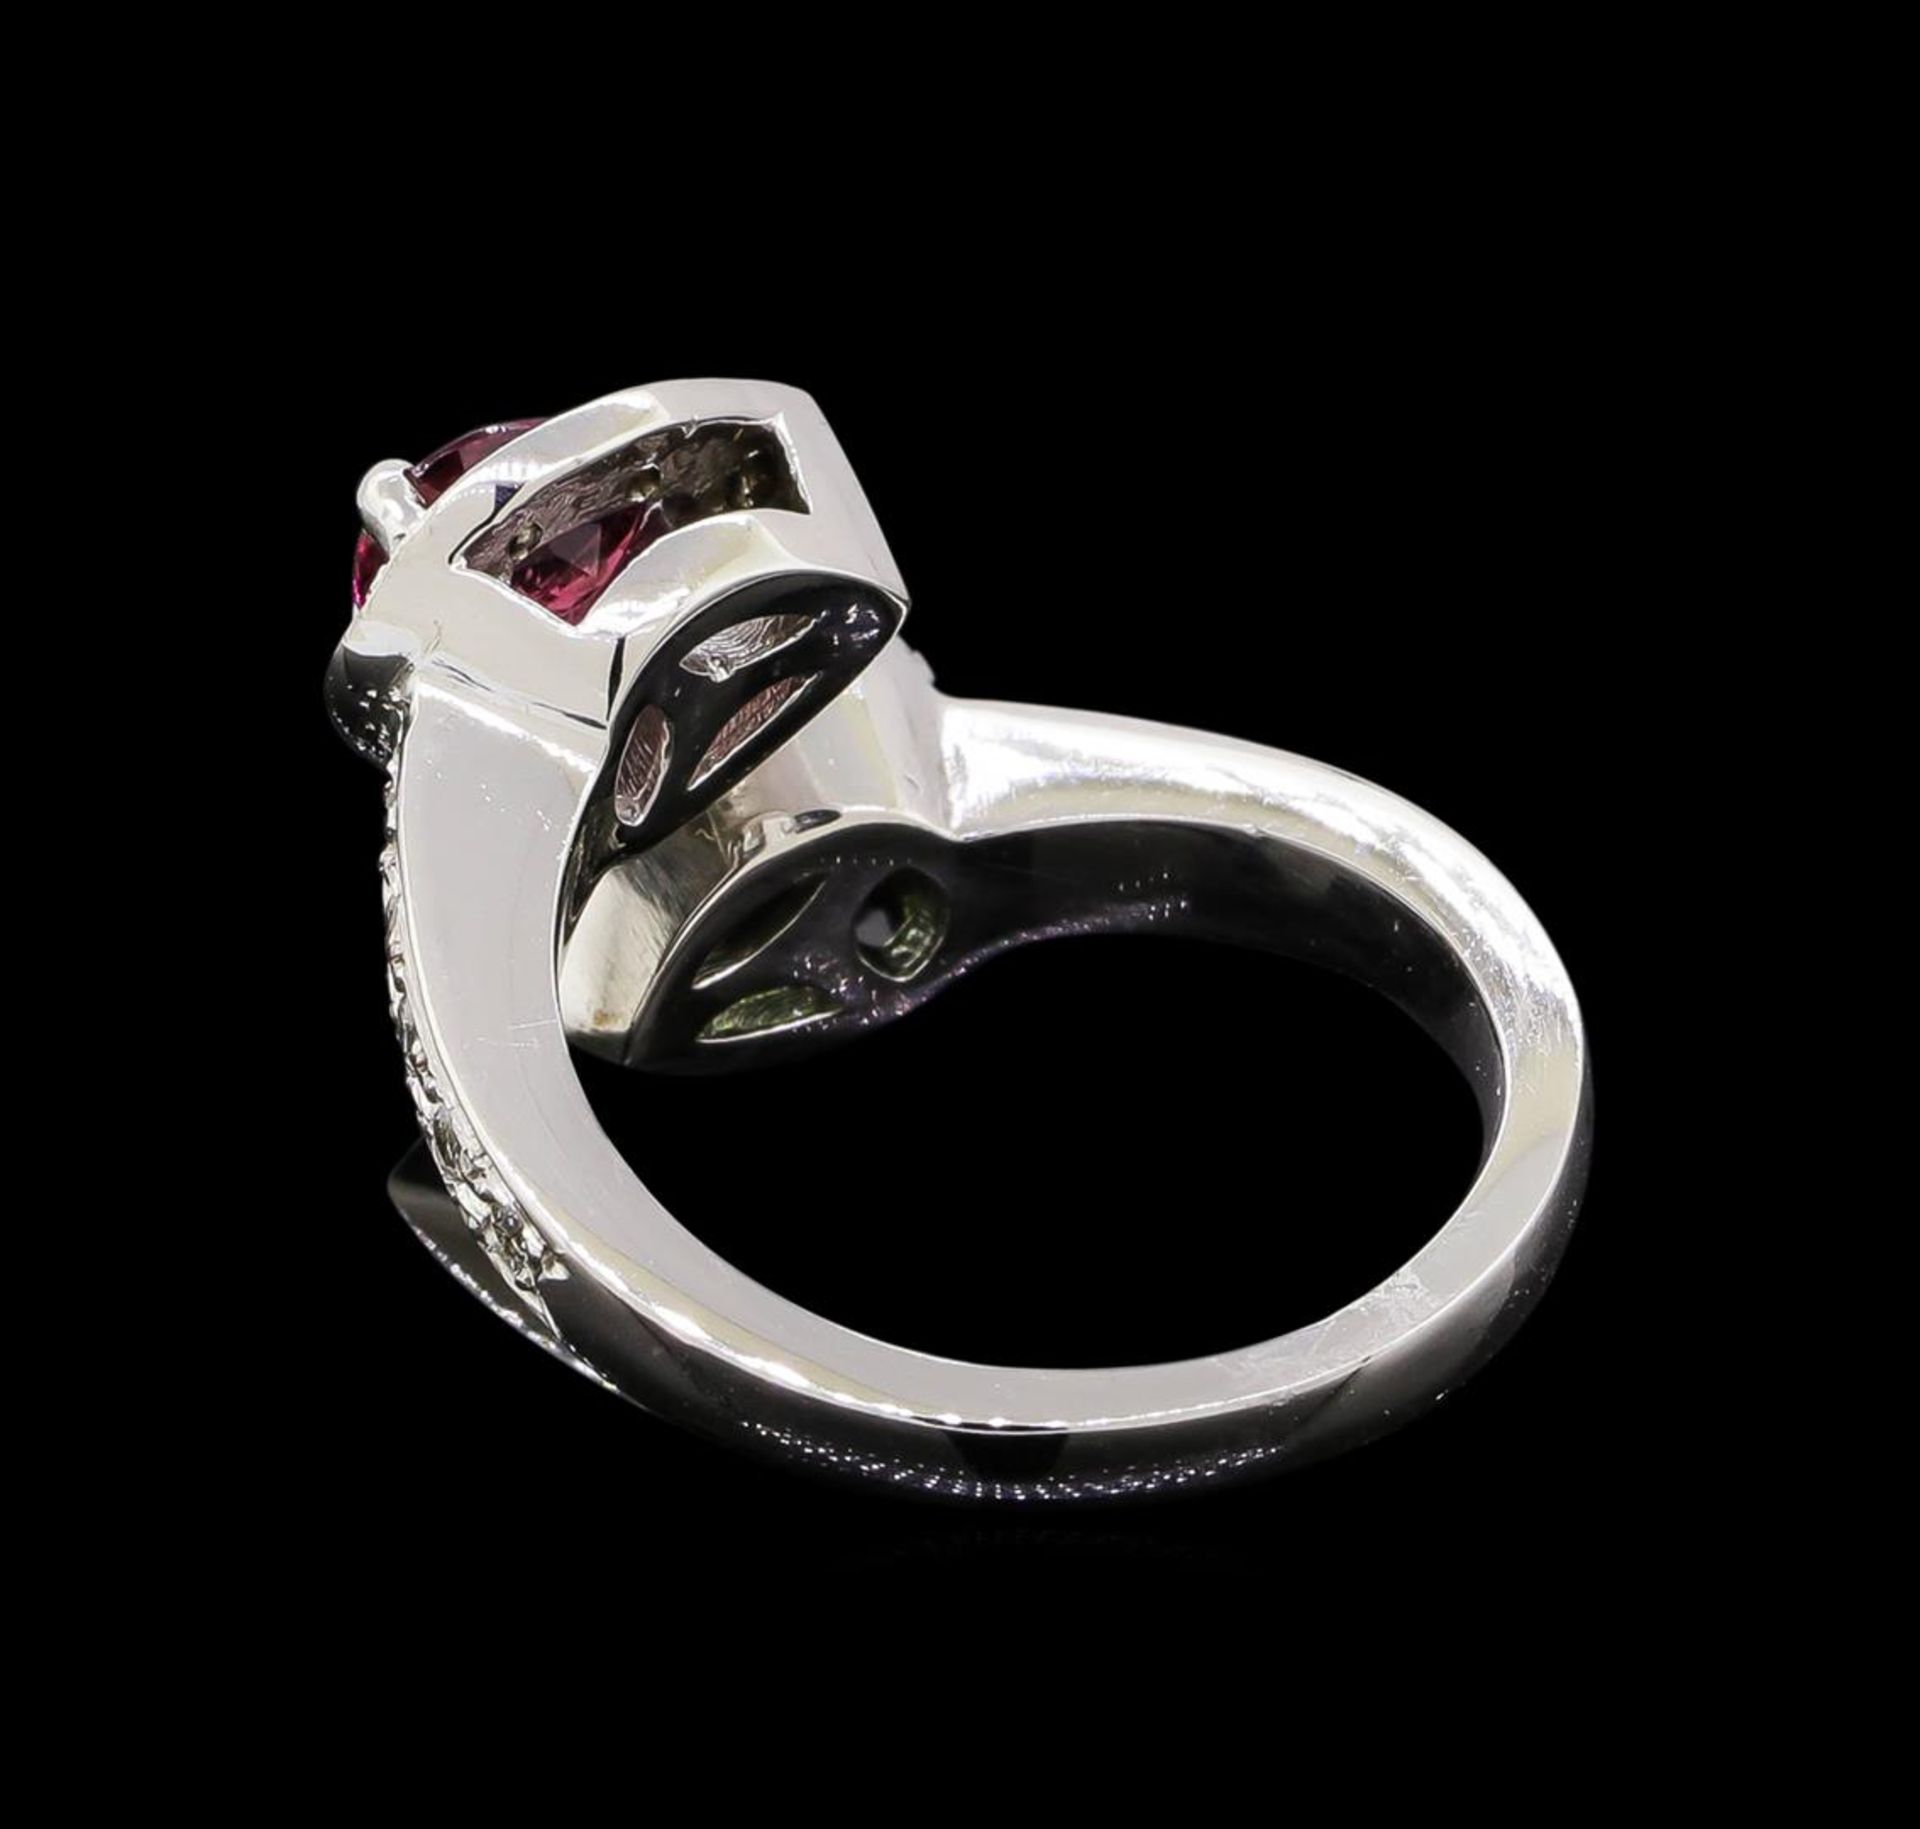 1.22 ctw Tourmaline and Diamond Ring - 14KT White Gold - Image 3 of 4